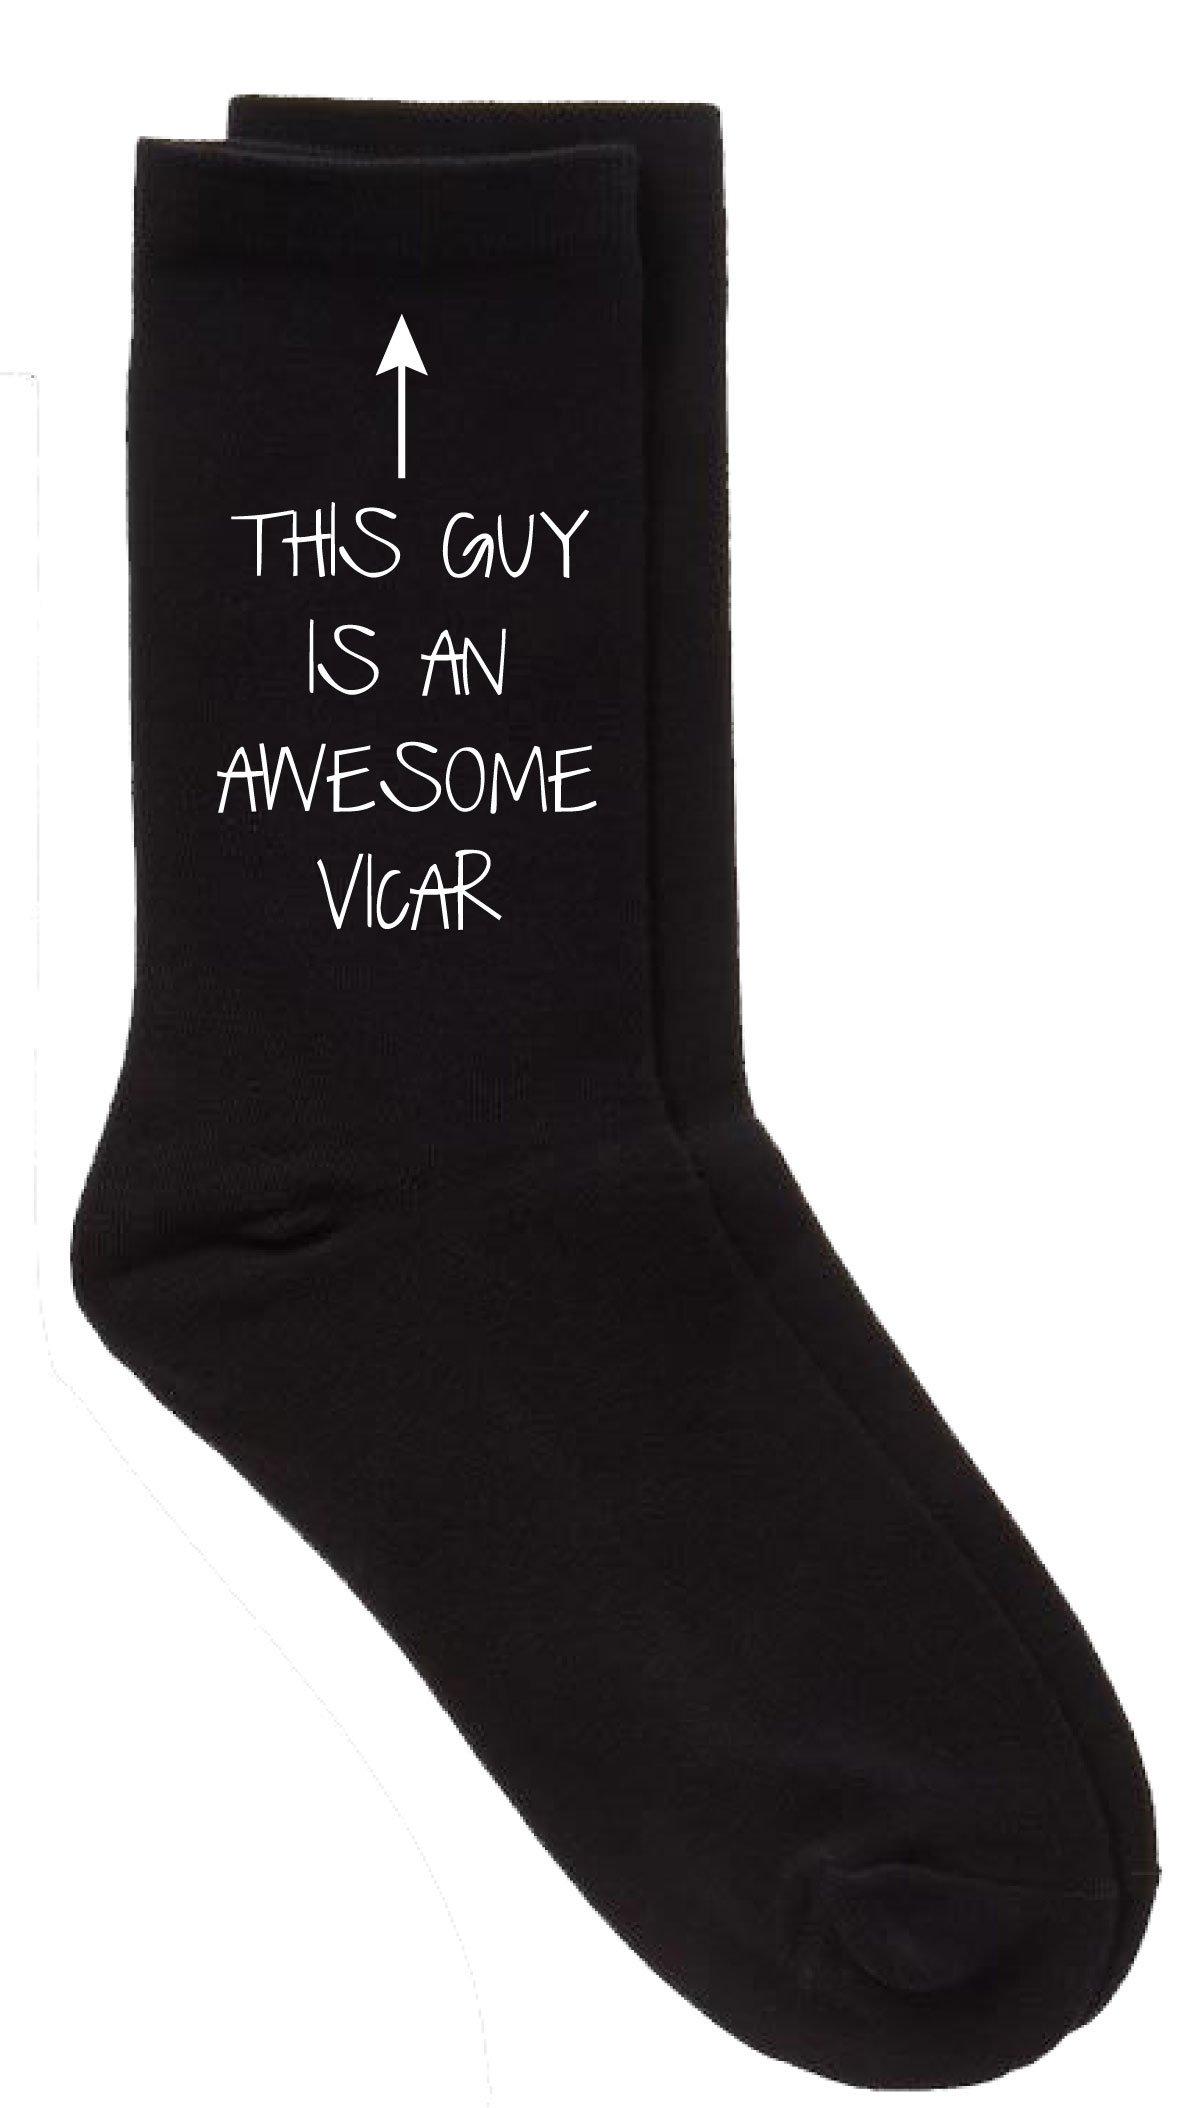 This Guy Is An Awesome Vicar Mens Black Socks